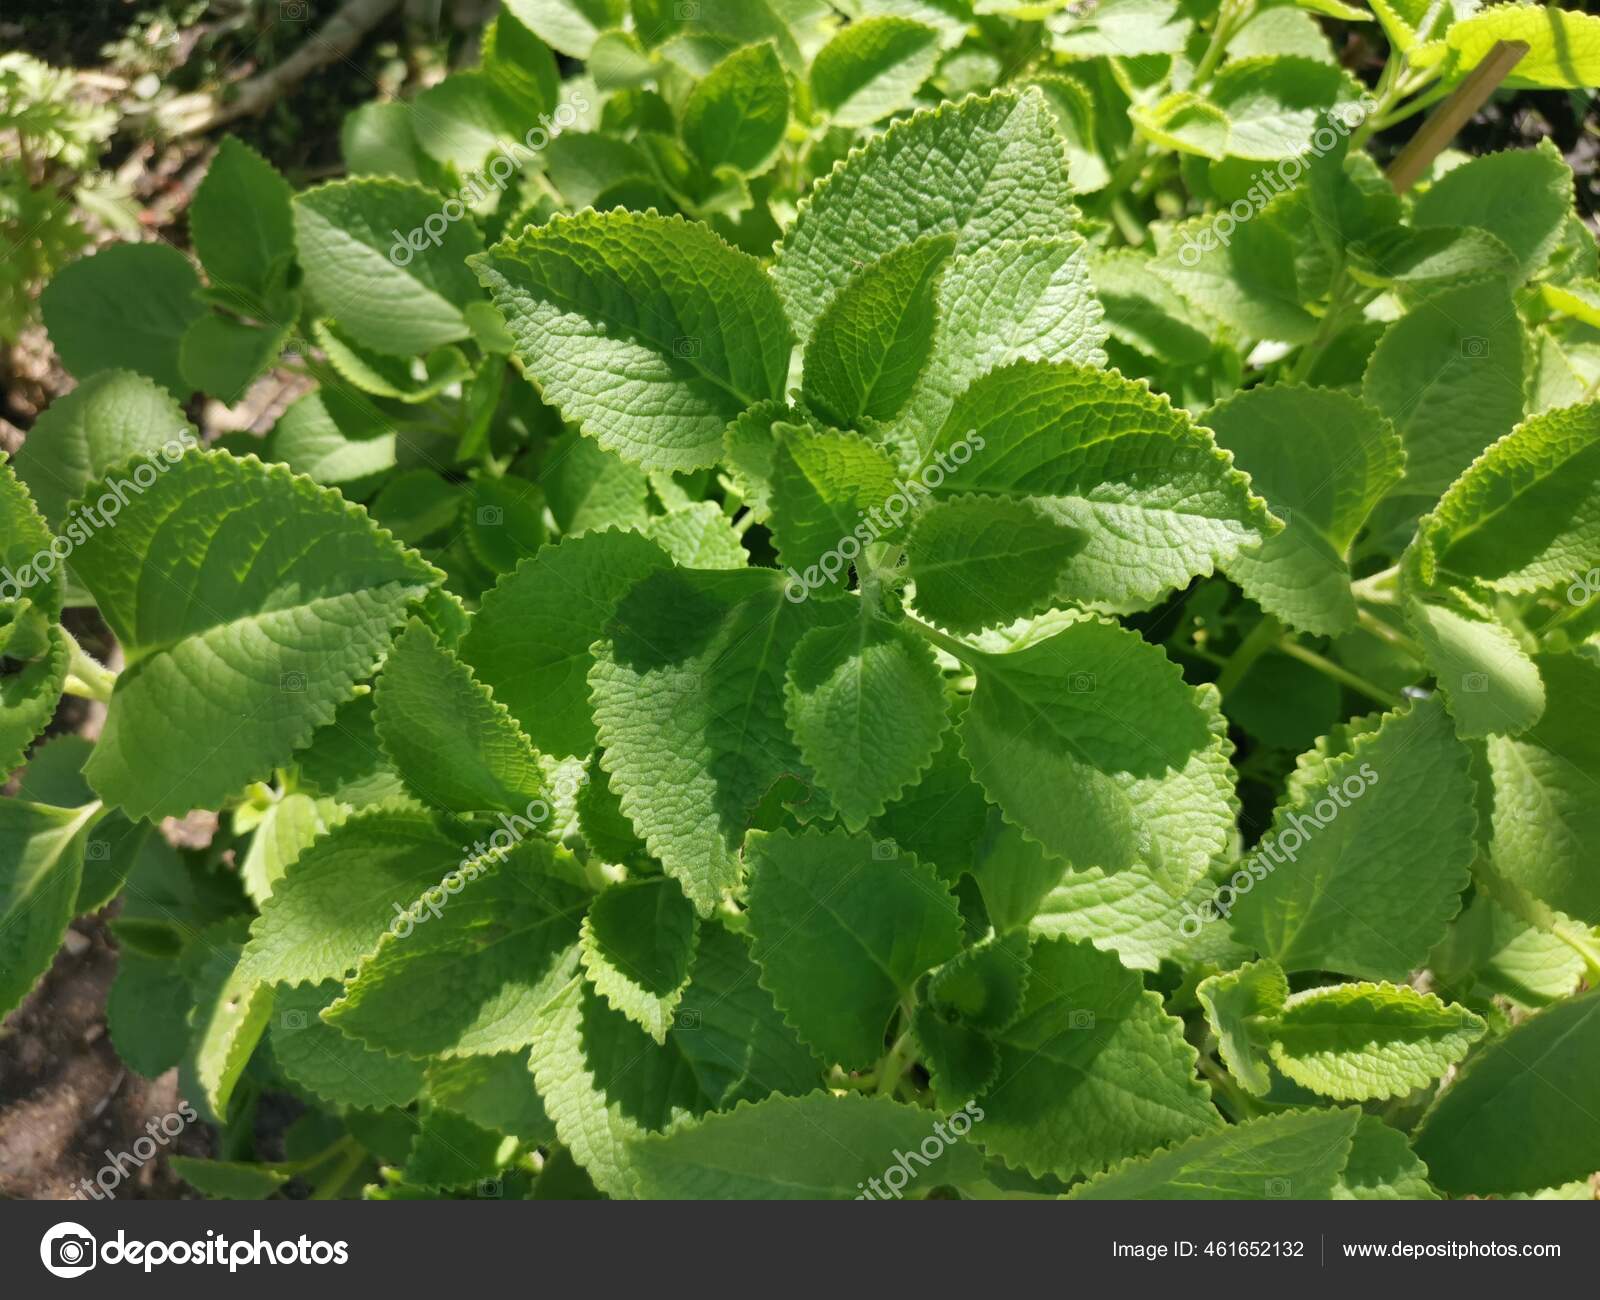 Green Leafly Plectranthus Amboinicus Plant Stock Photo by ...